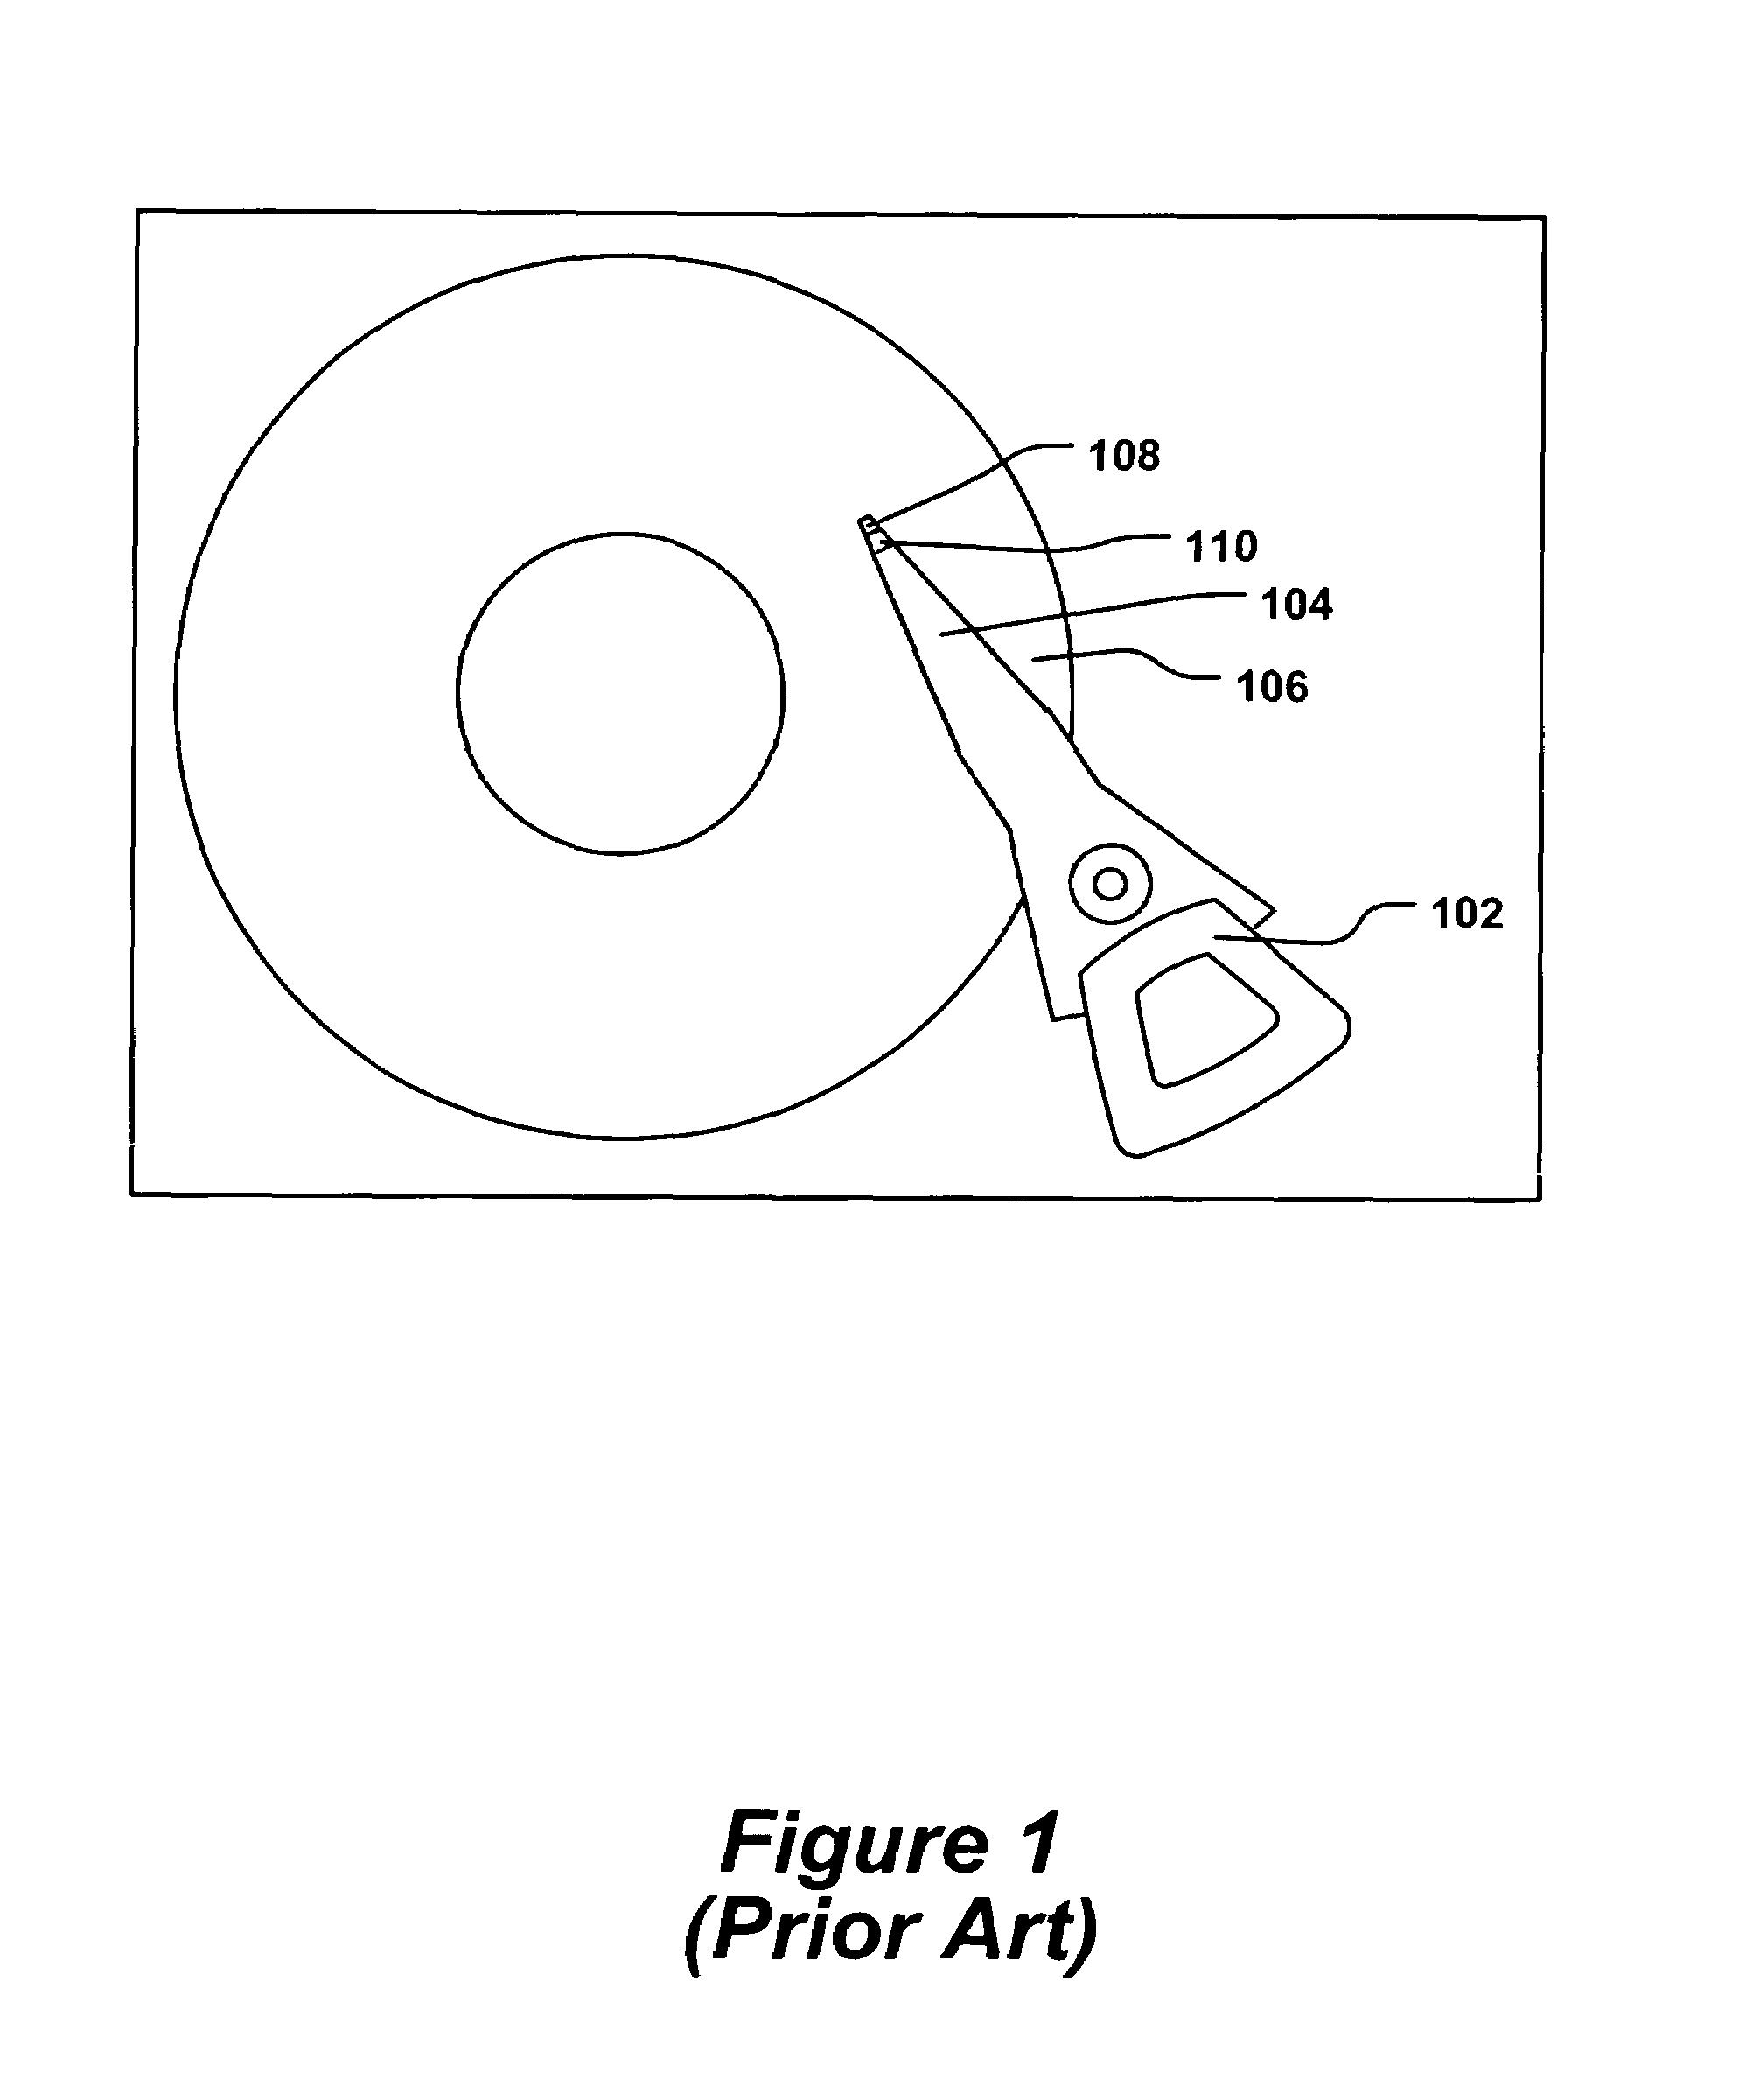 Method for preventing operational and manufacturing imperfections in piezoelectric micro-actuators